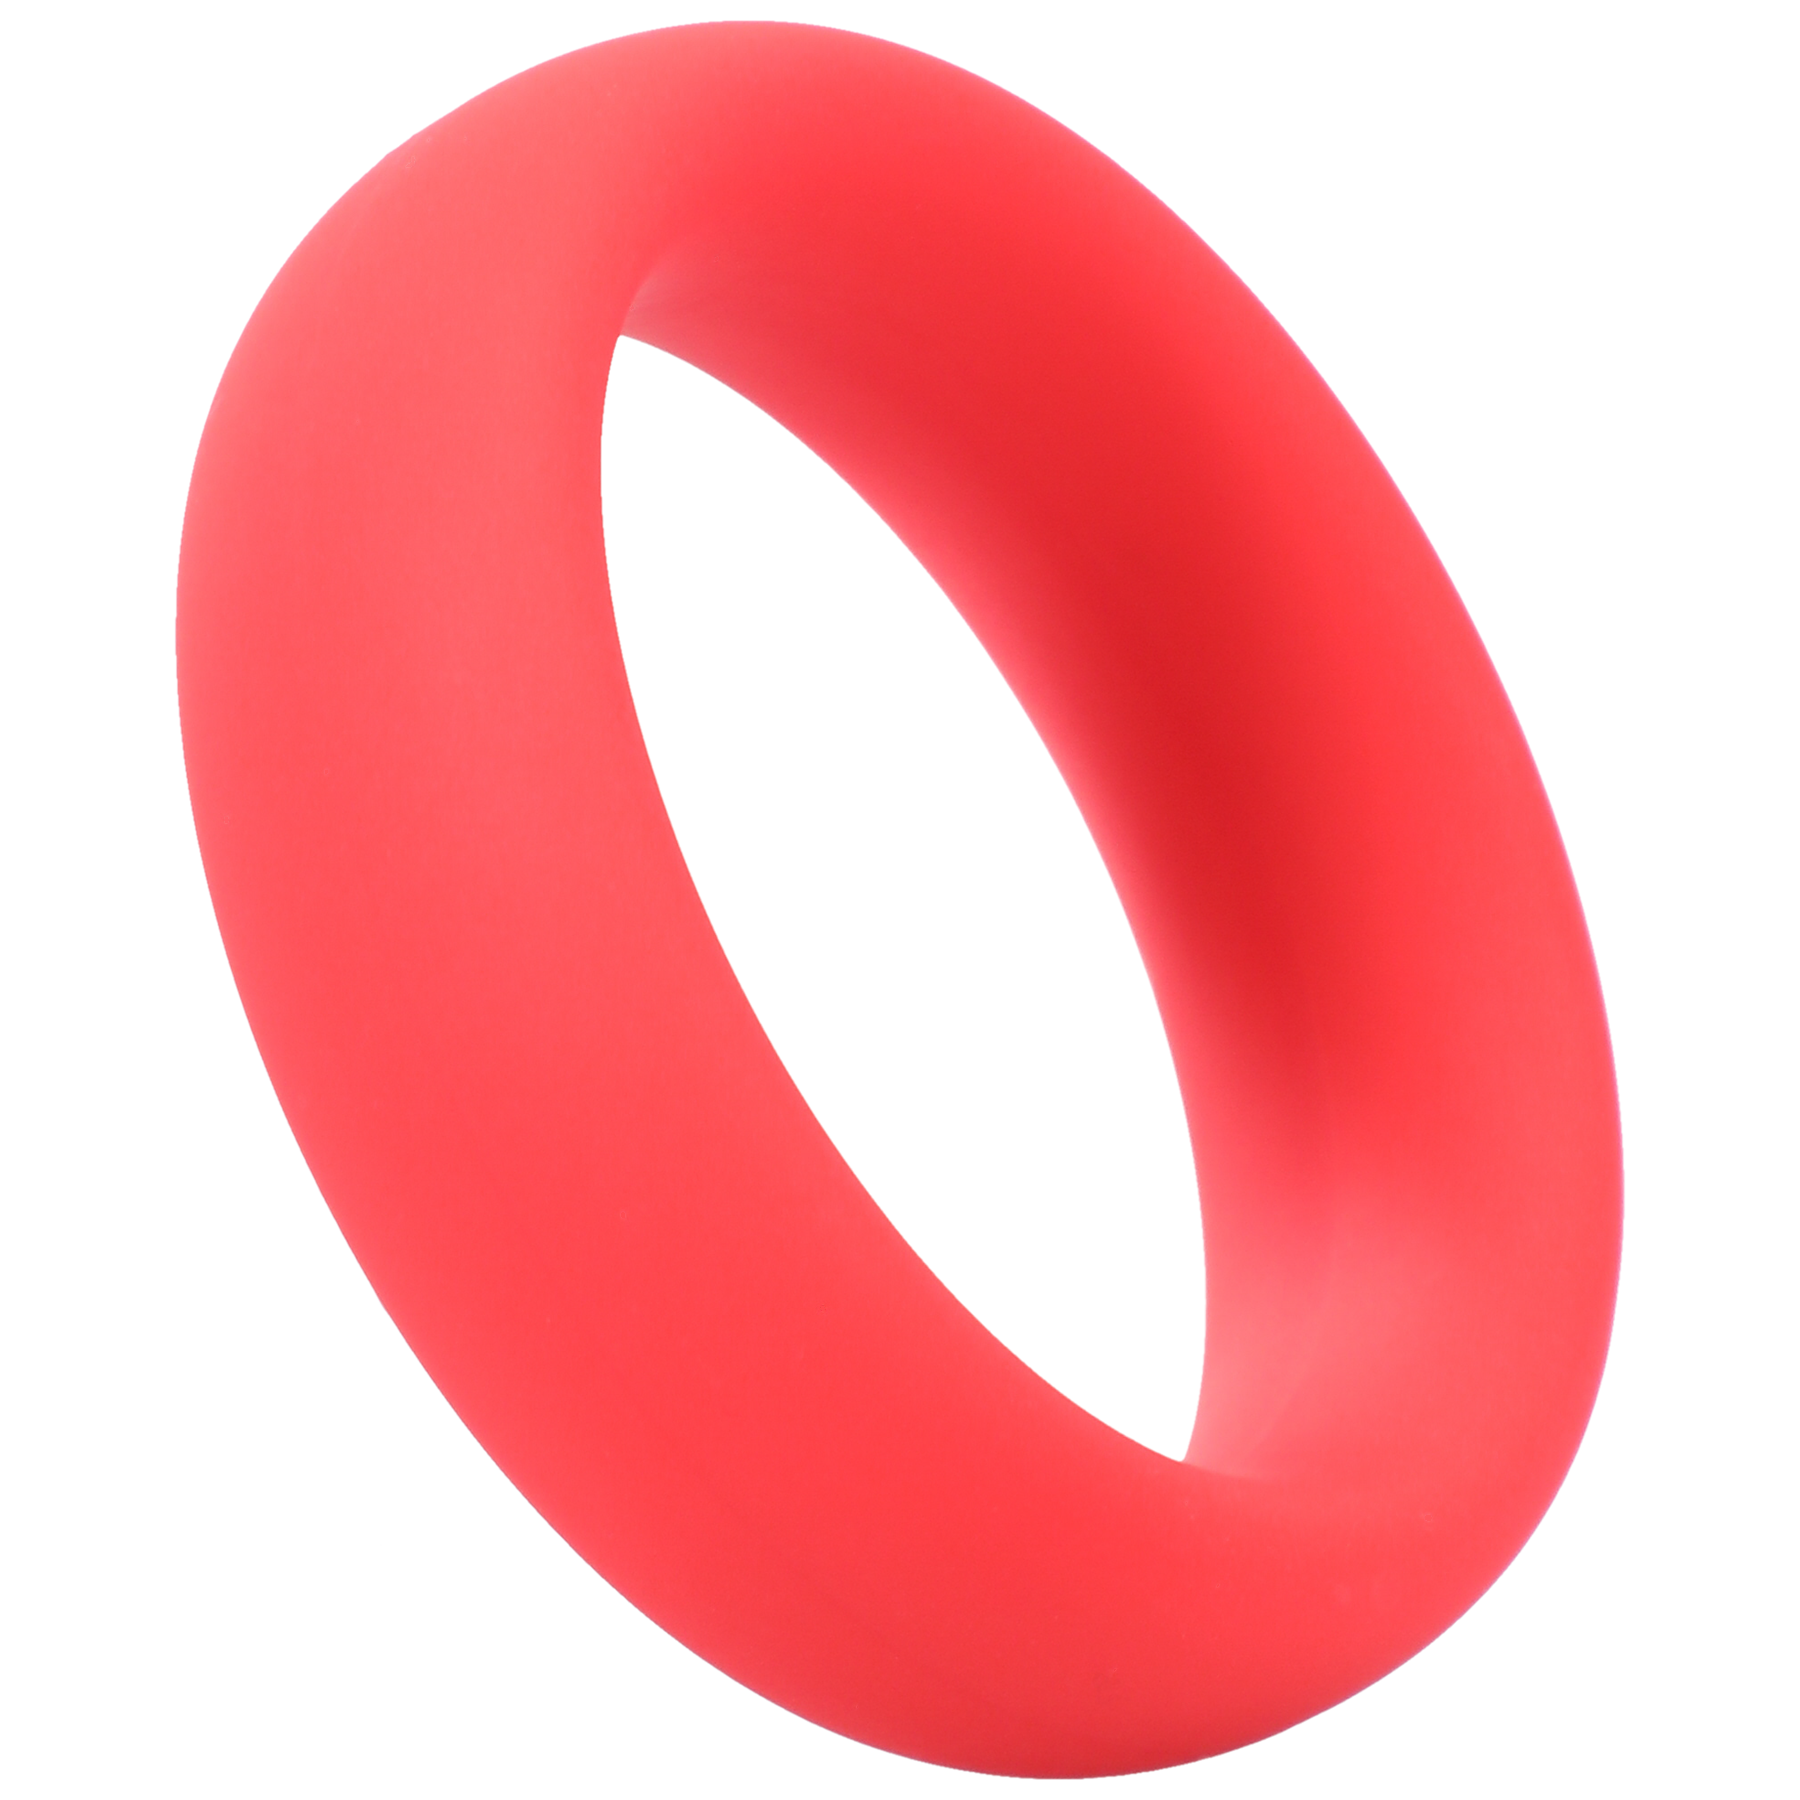 Mecofy Silicone Rings Cock Ring, 5 Piece Ultra Soft Cock Ring Set